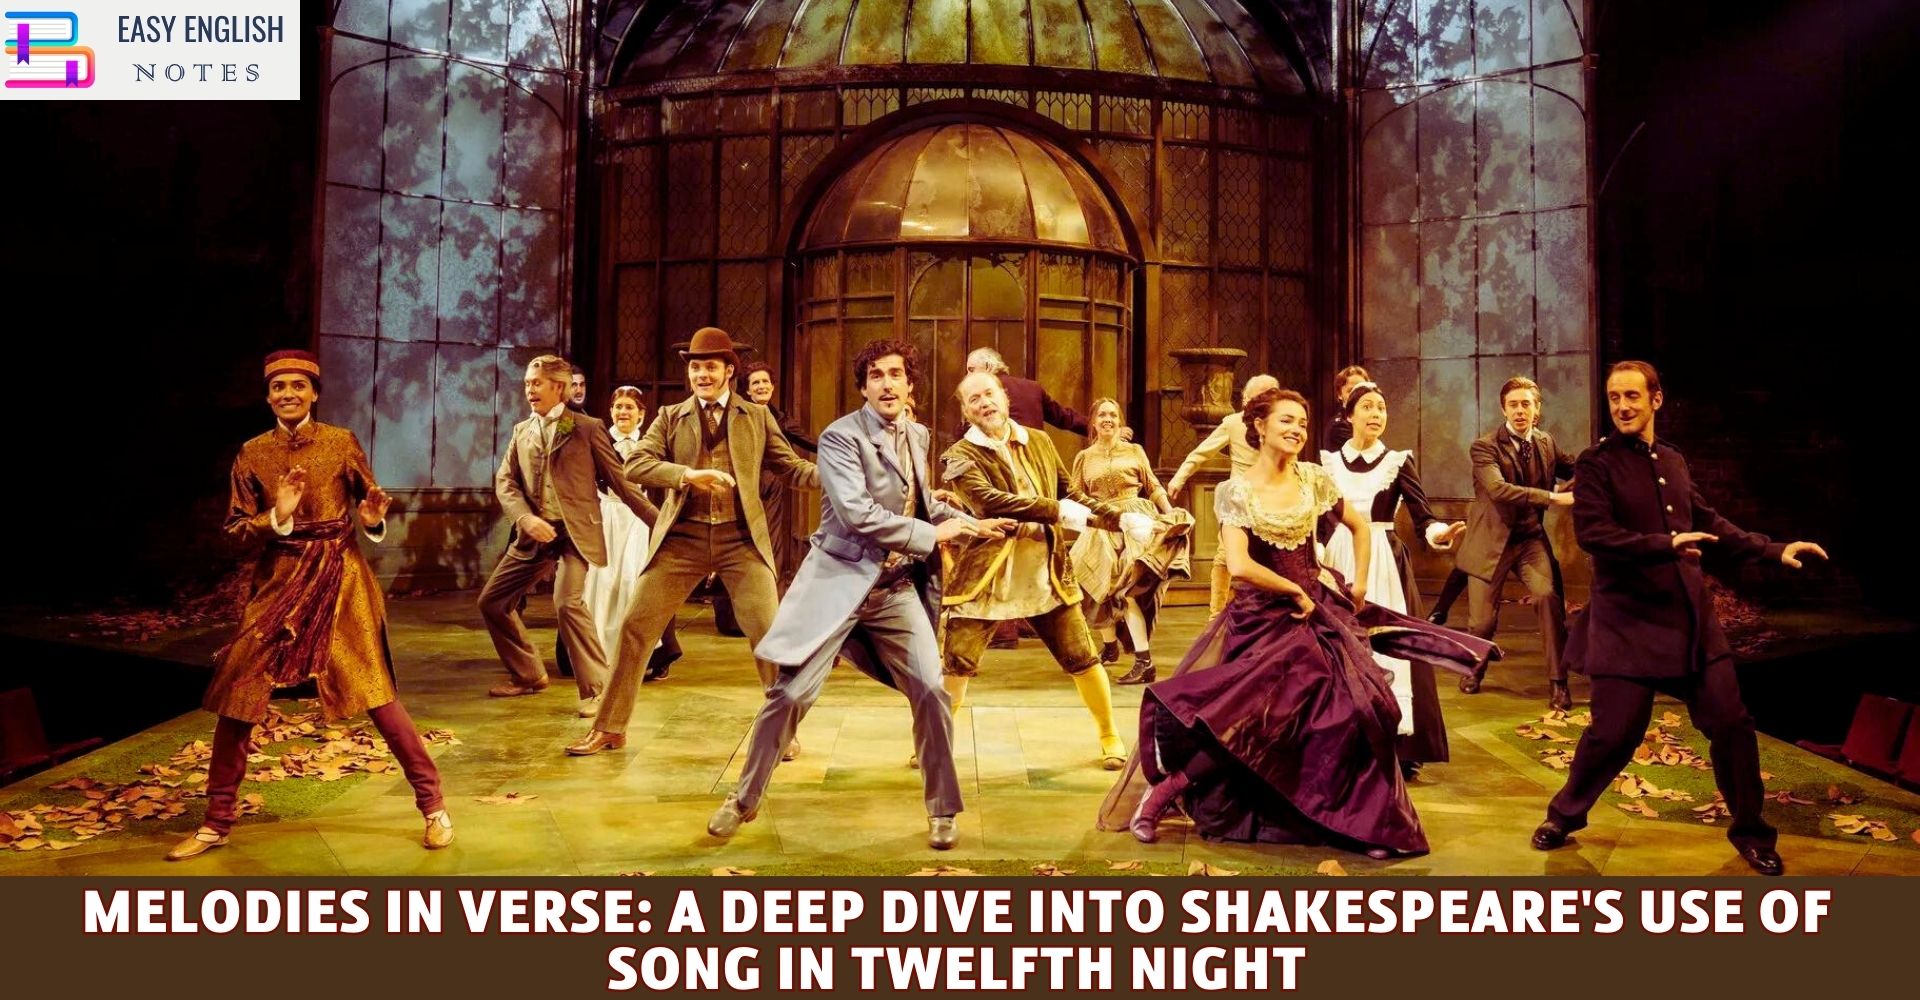 Melodies in Verse: A Deep Dive into Shakespeare's Use of Song in Twelfth Night